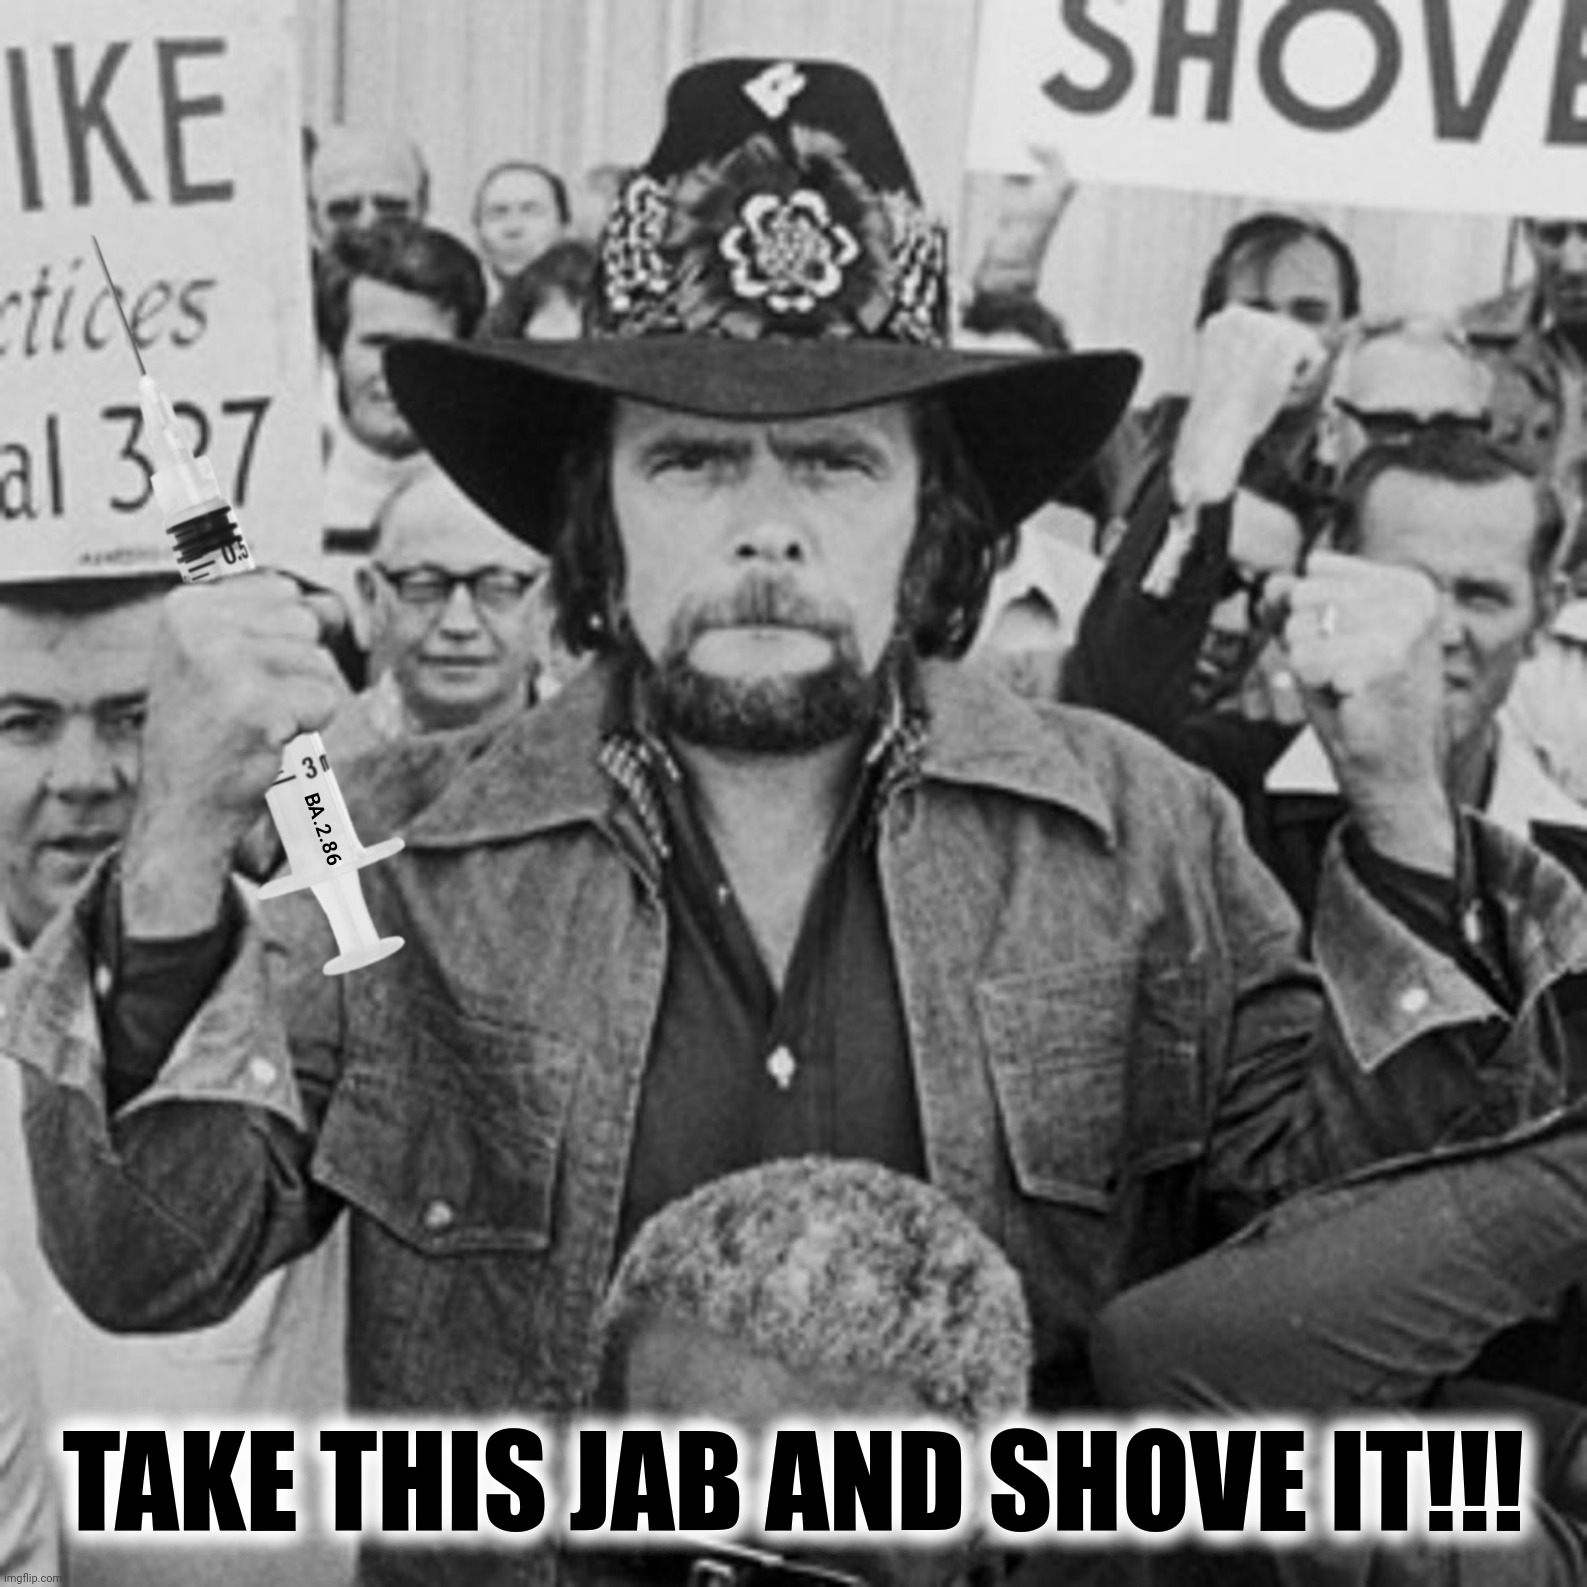 Bad Photoshop Sunday presents:  "Take This Jab And Shove it" | TAKE THIS JAB AND SHOVE IT!!! | image tagged in bad photoshop,johnny paycheck,take this job and shove it,take this jab and shove it | made w/ Imgflip meme maker